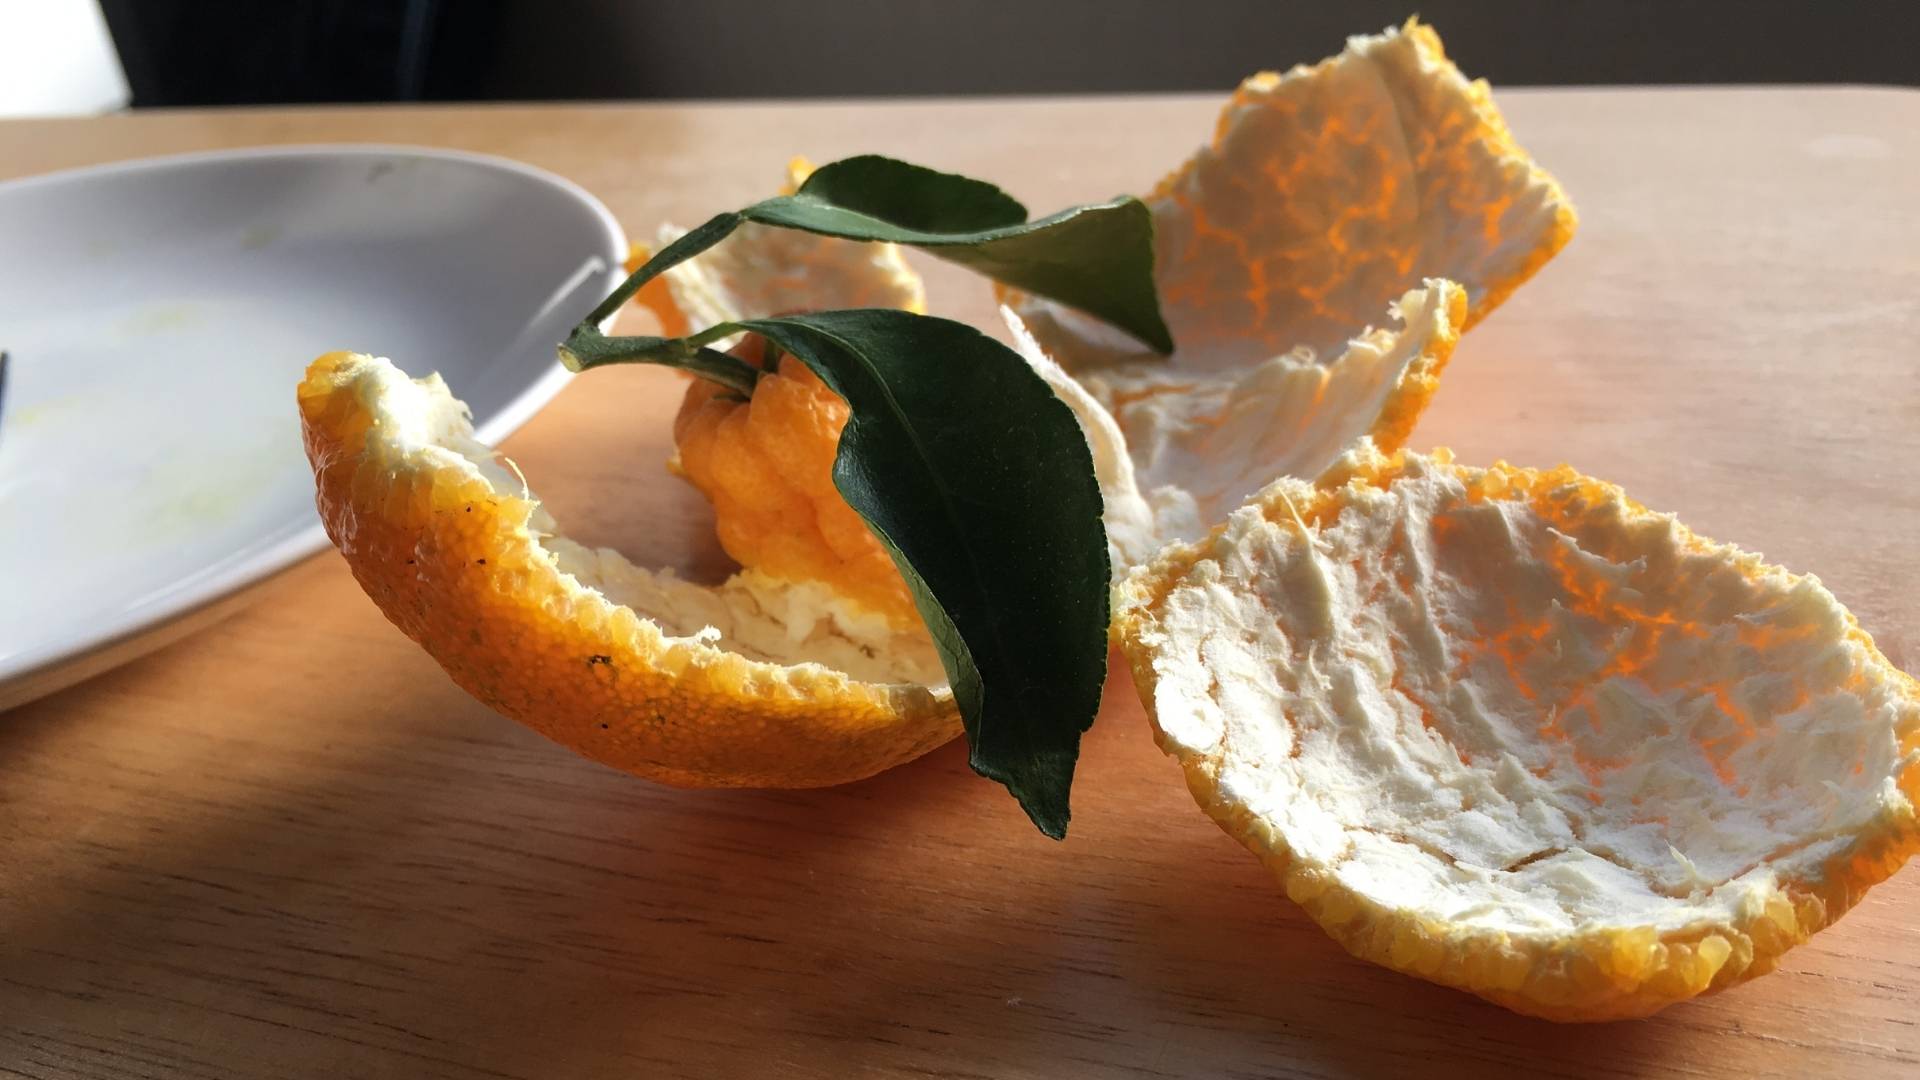 Orange peels on top of a wooden table